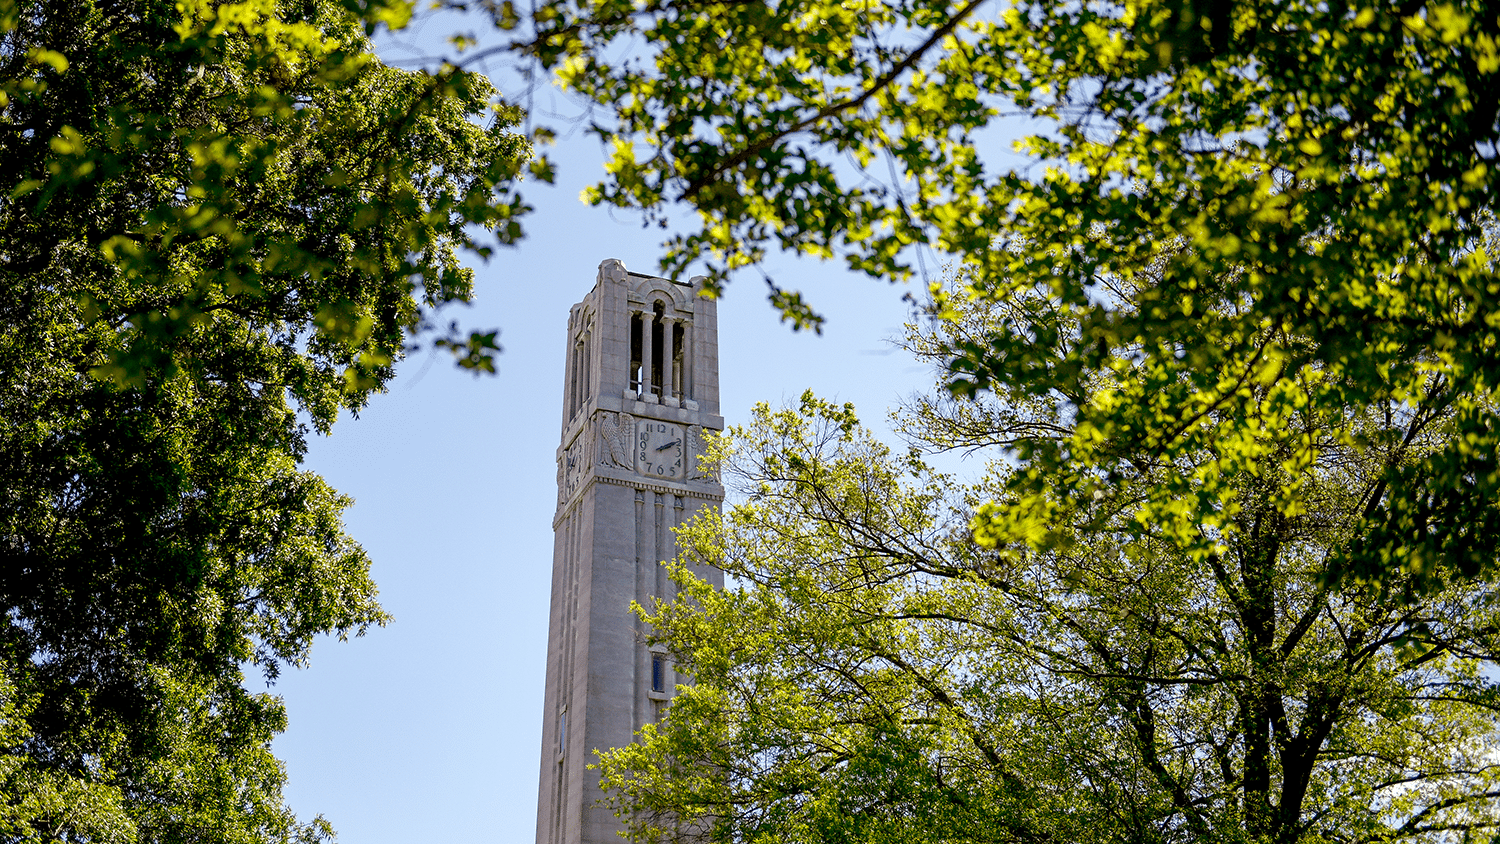 The Belltower surrounded by lush greenery in summer.